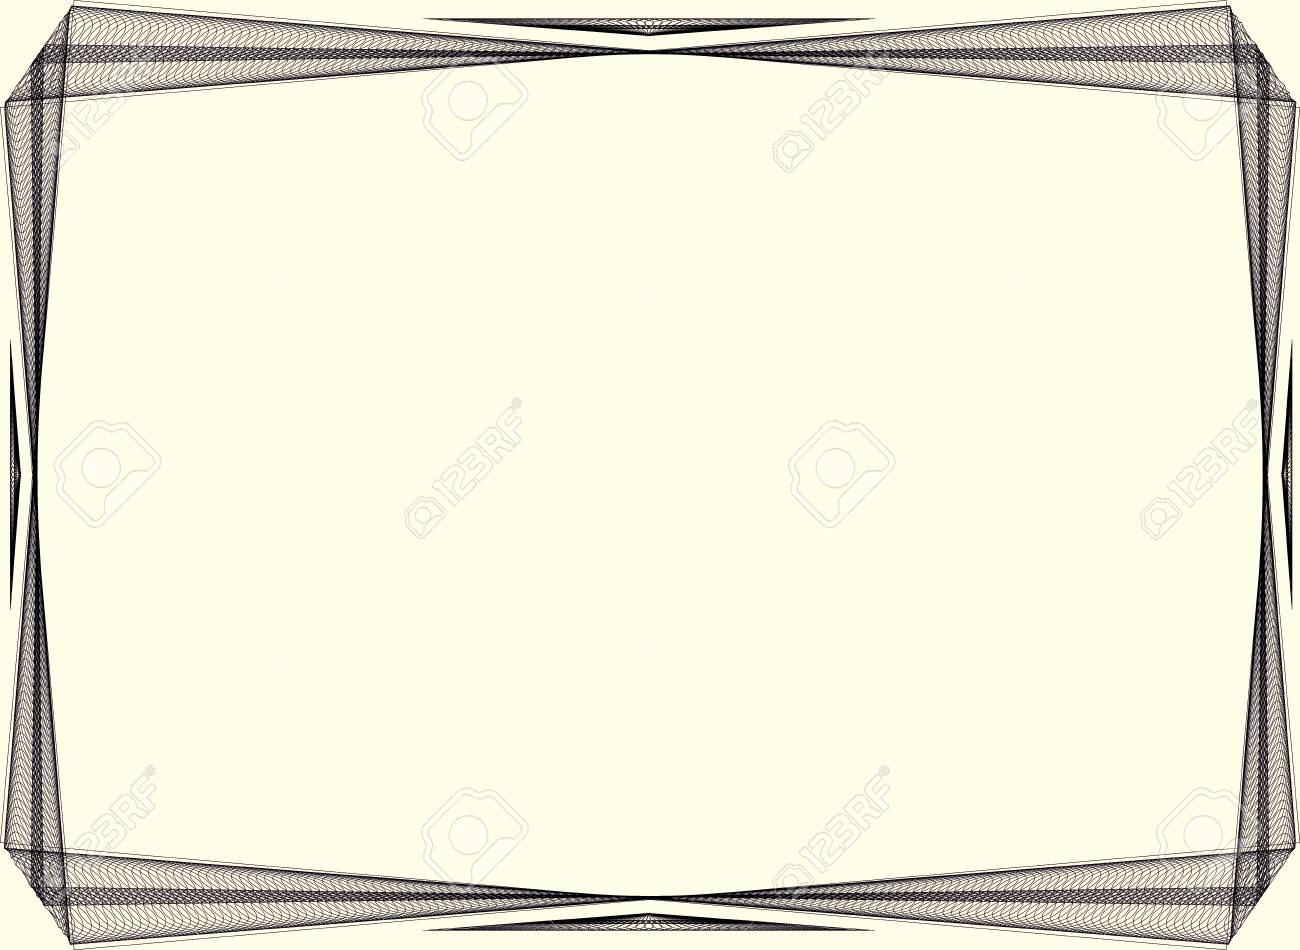 Insulated Frame Background Template For Certificate Or Diploma